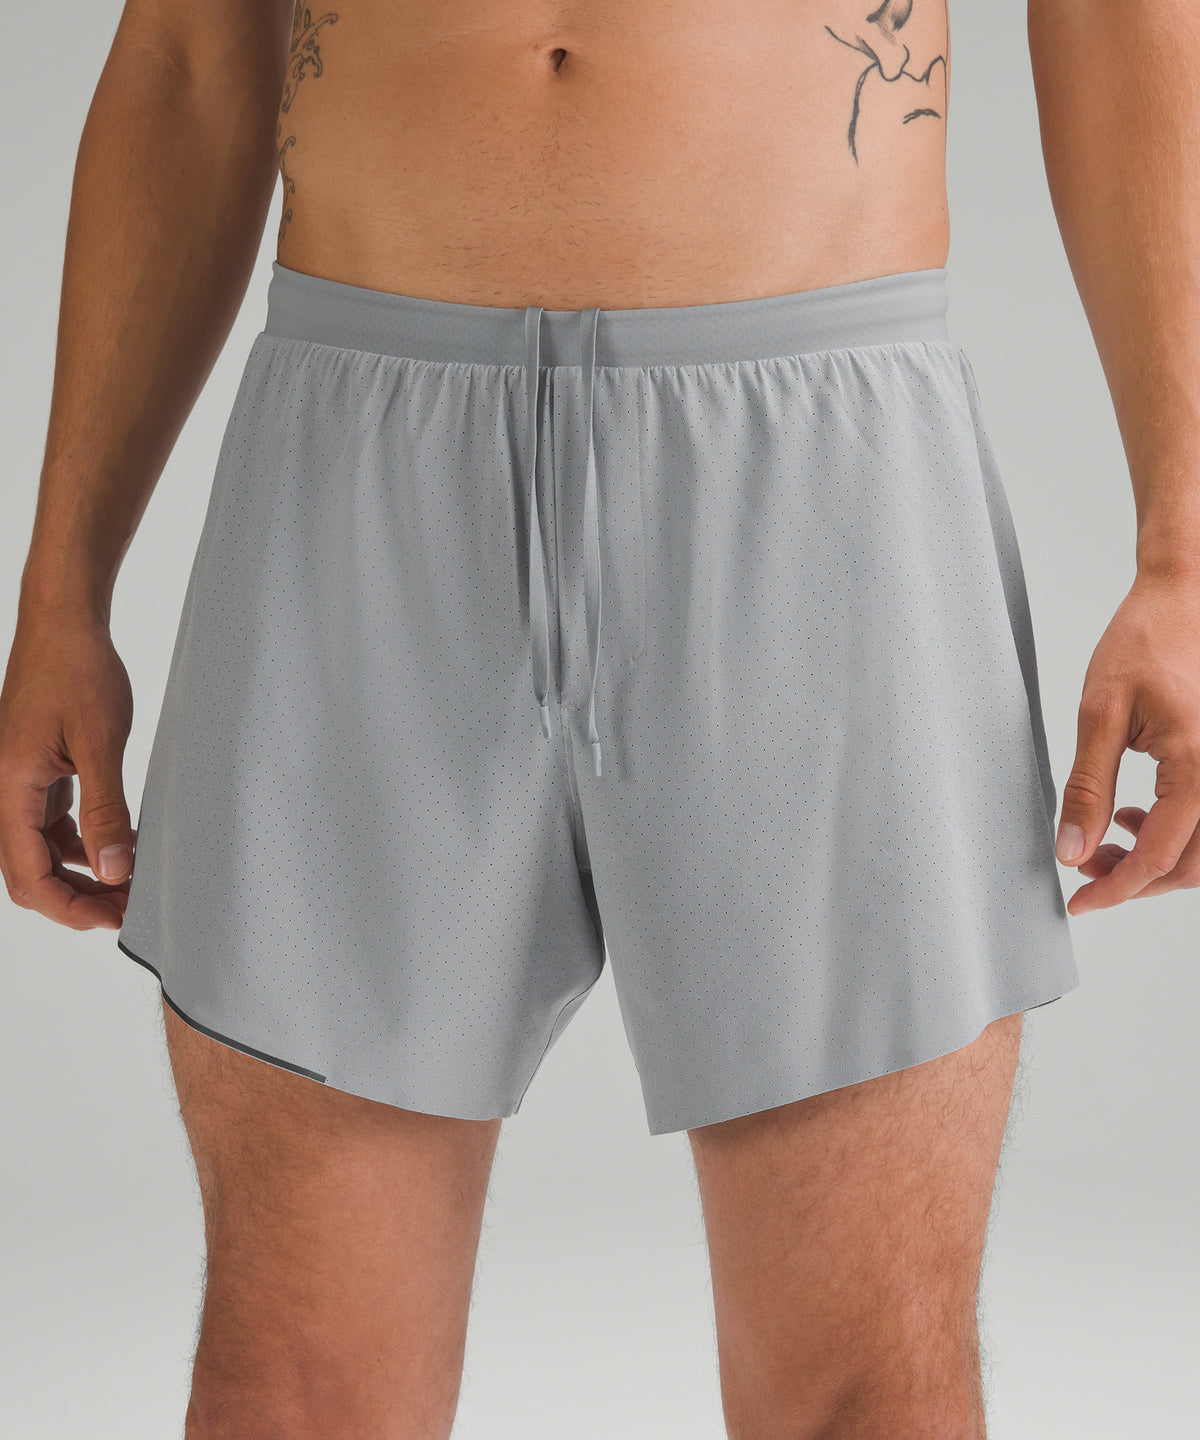 Lululemon Fast and Free Short 6" - Lined